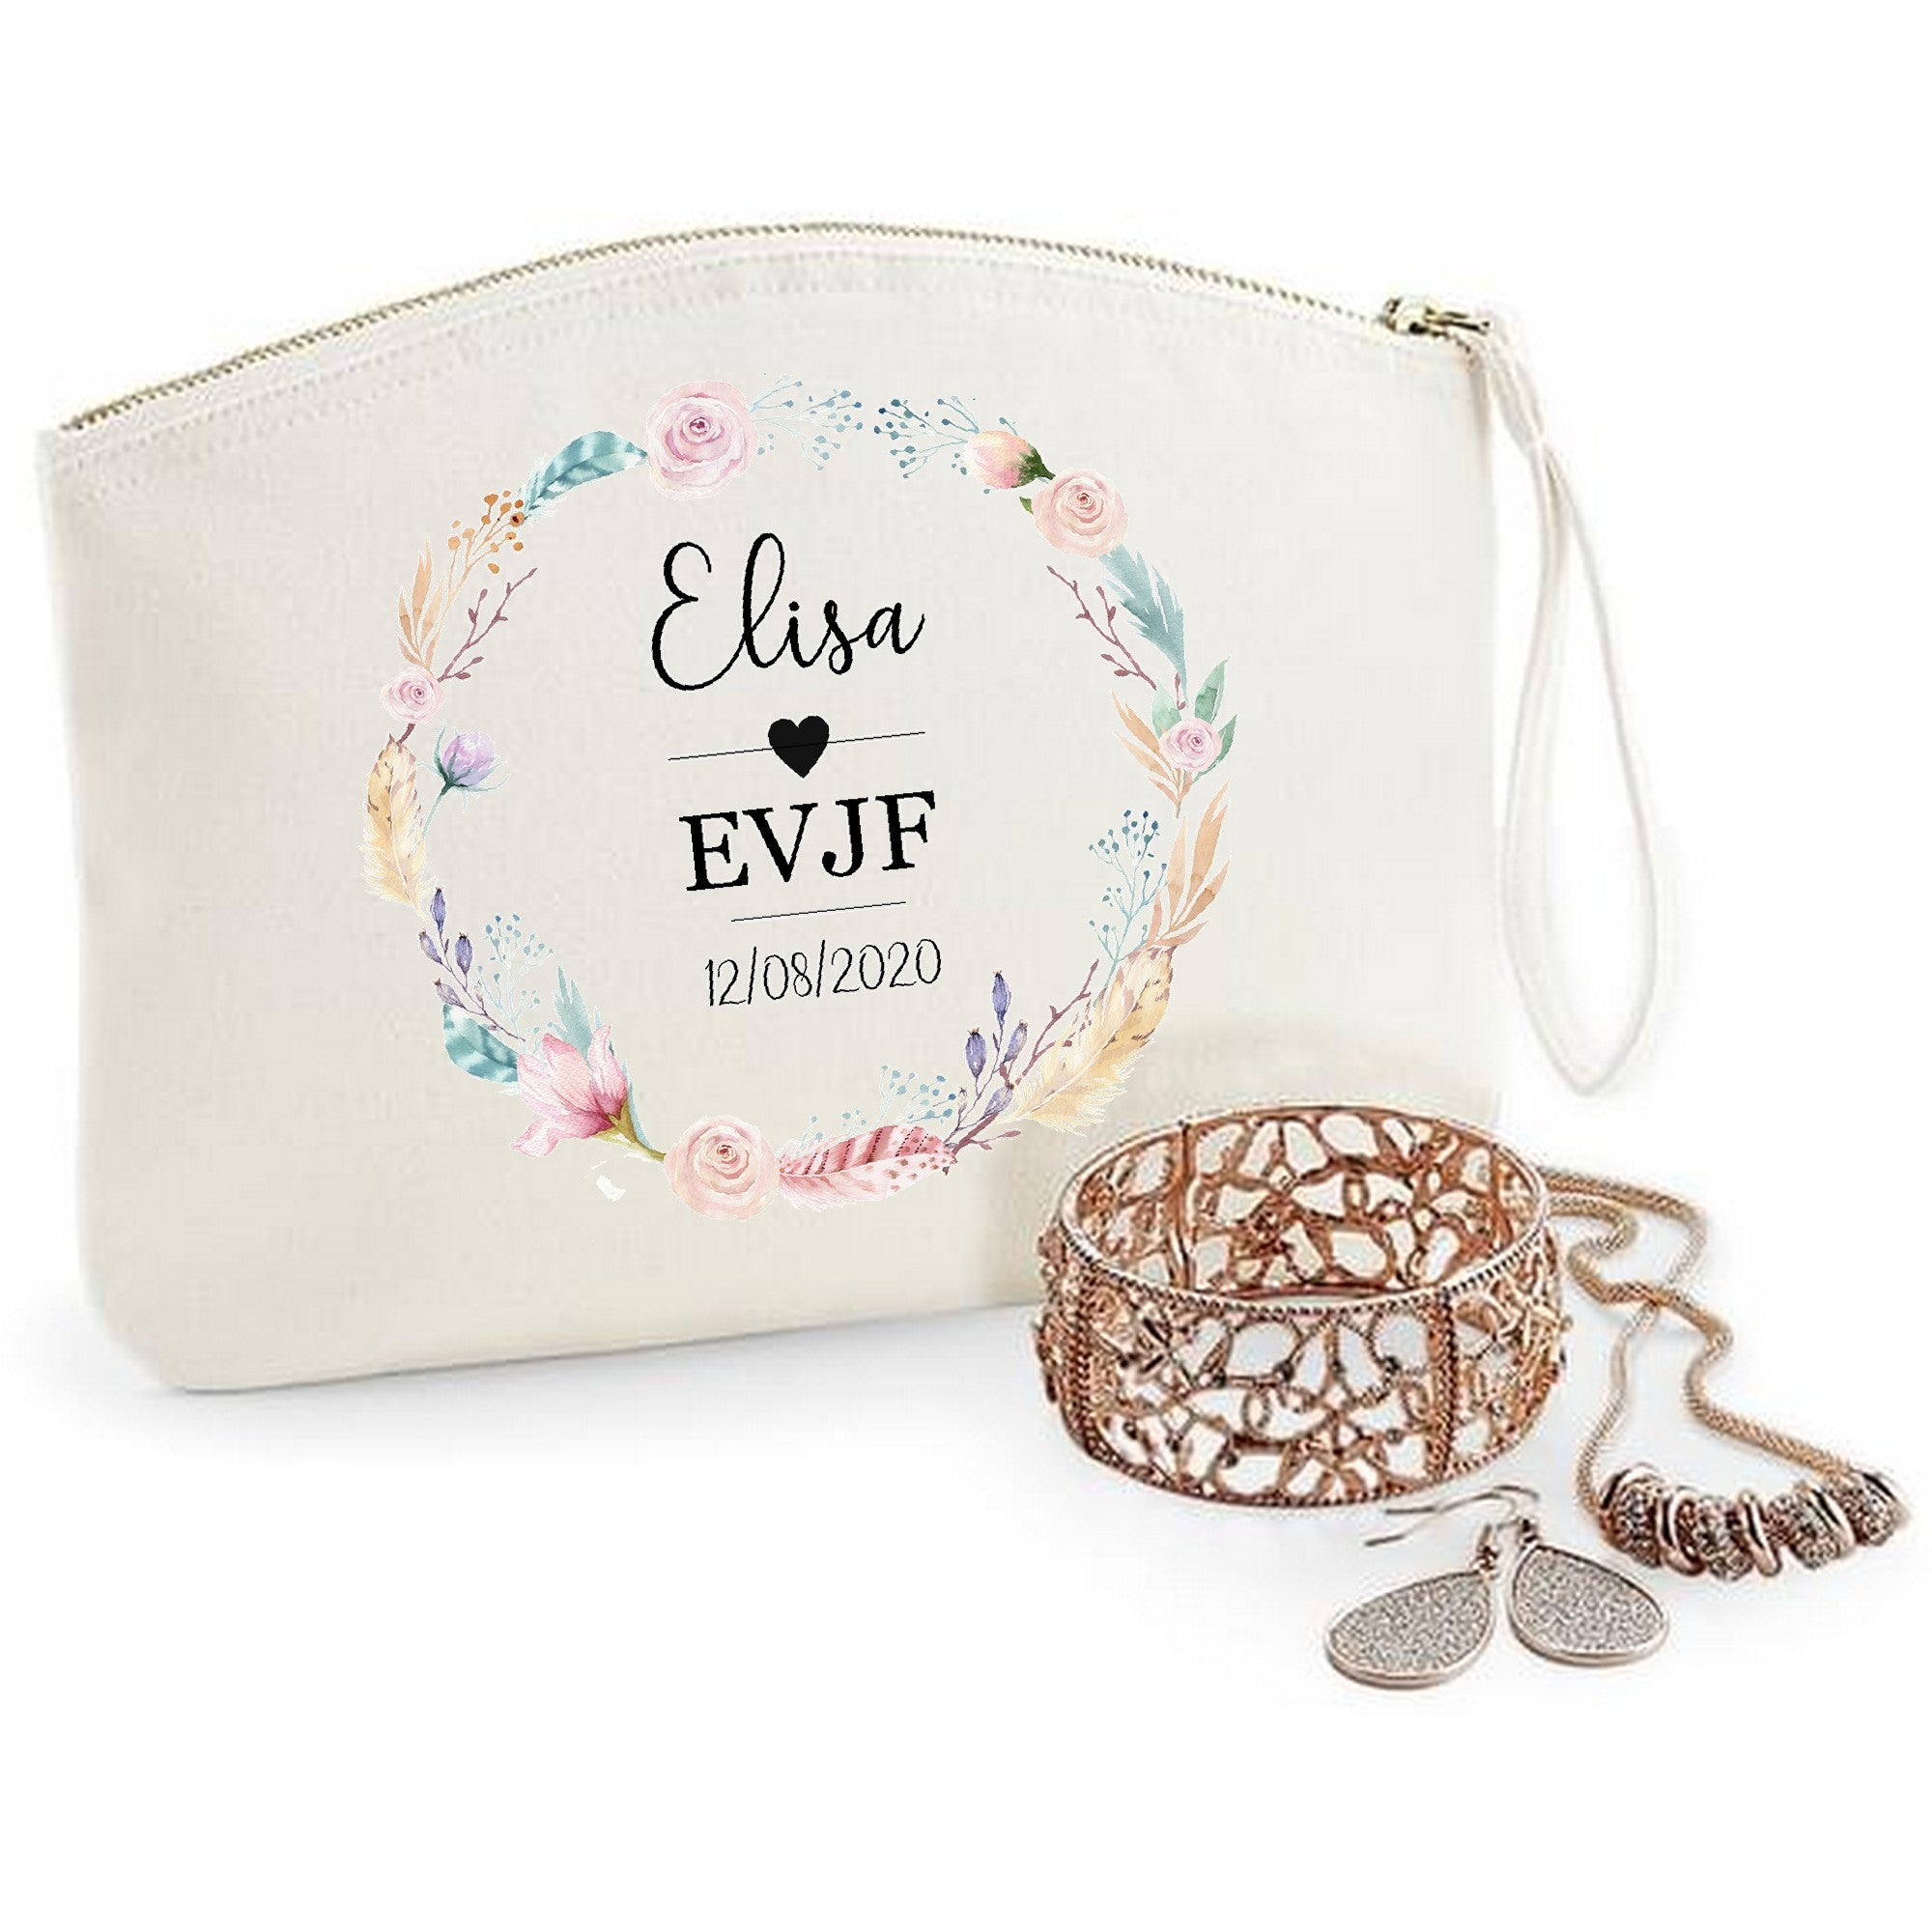 Pochette personnalisable evjf – Cool and the bag